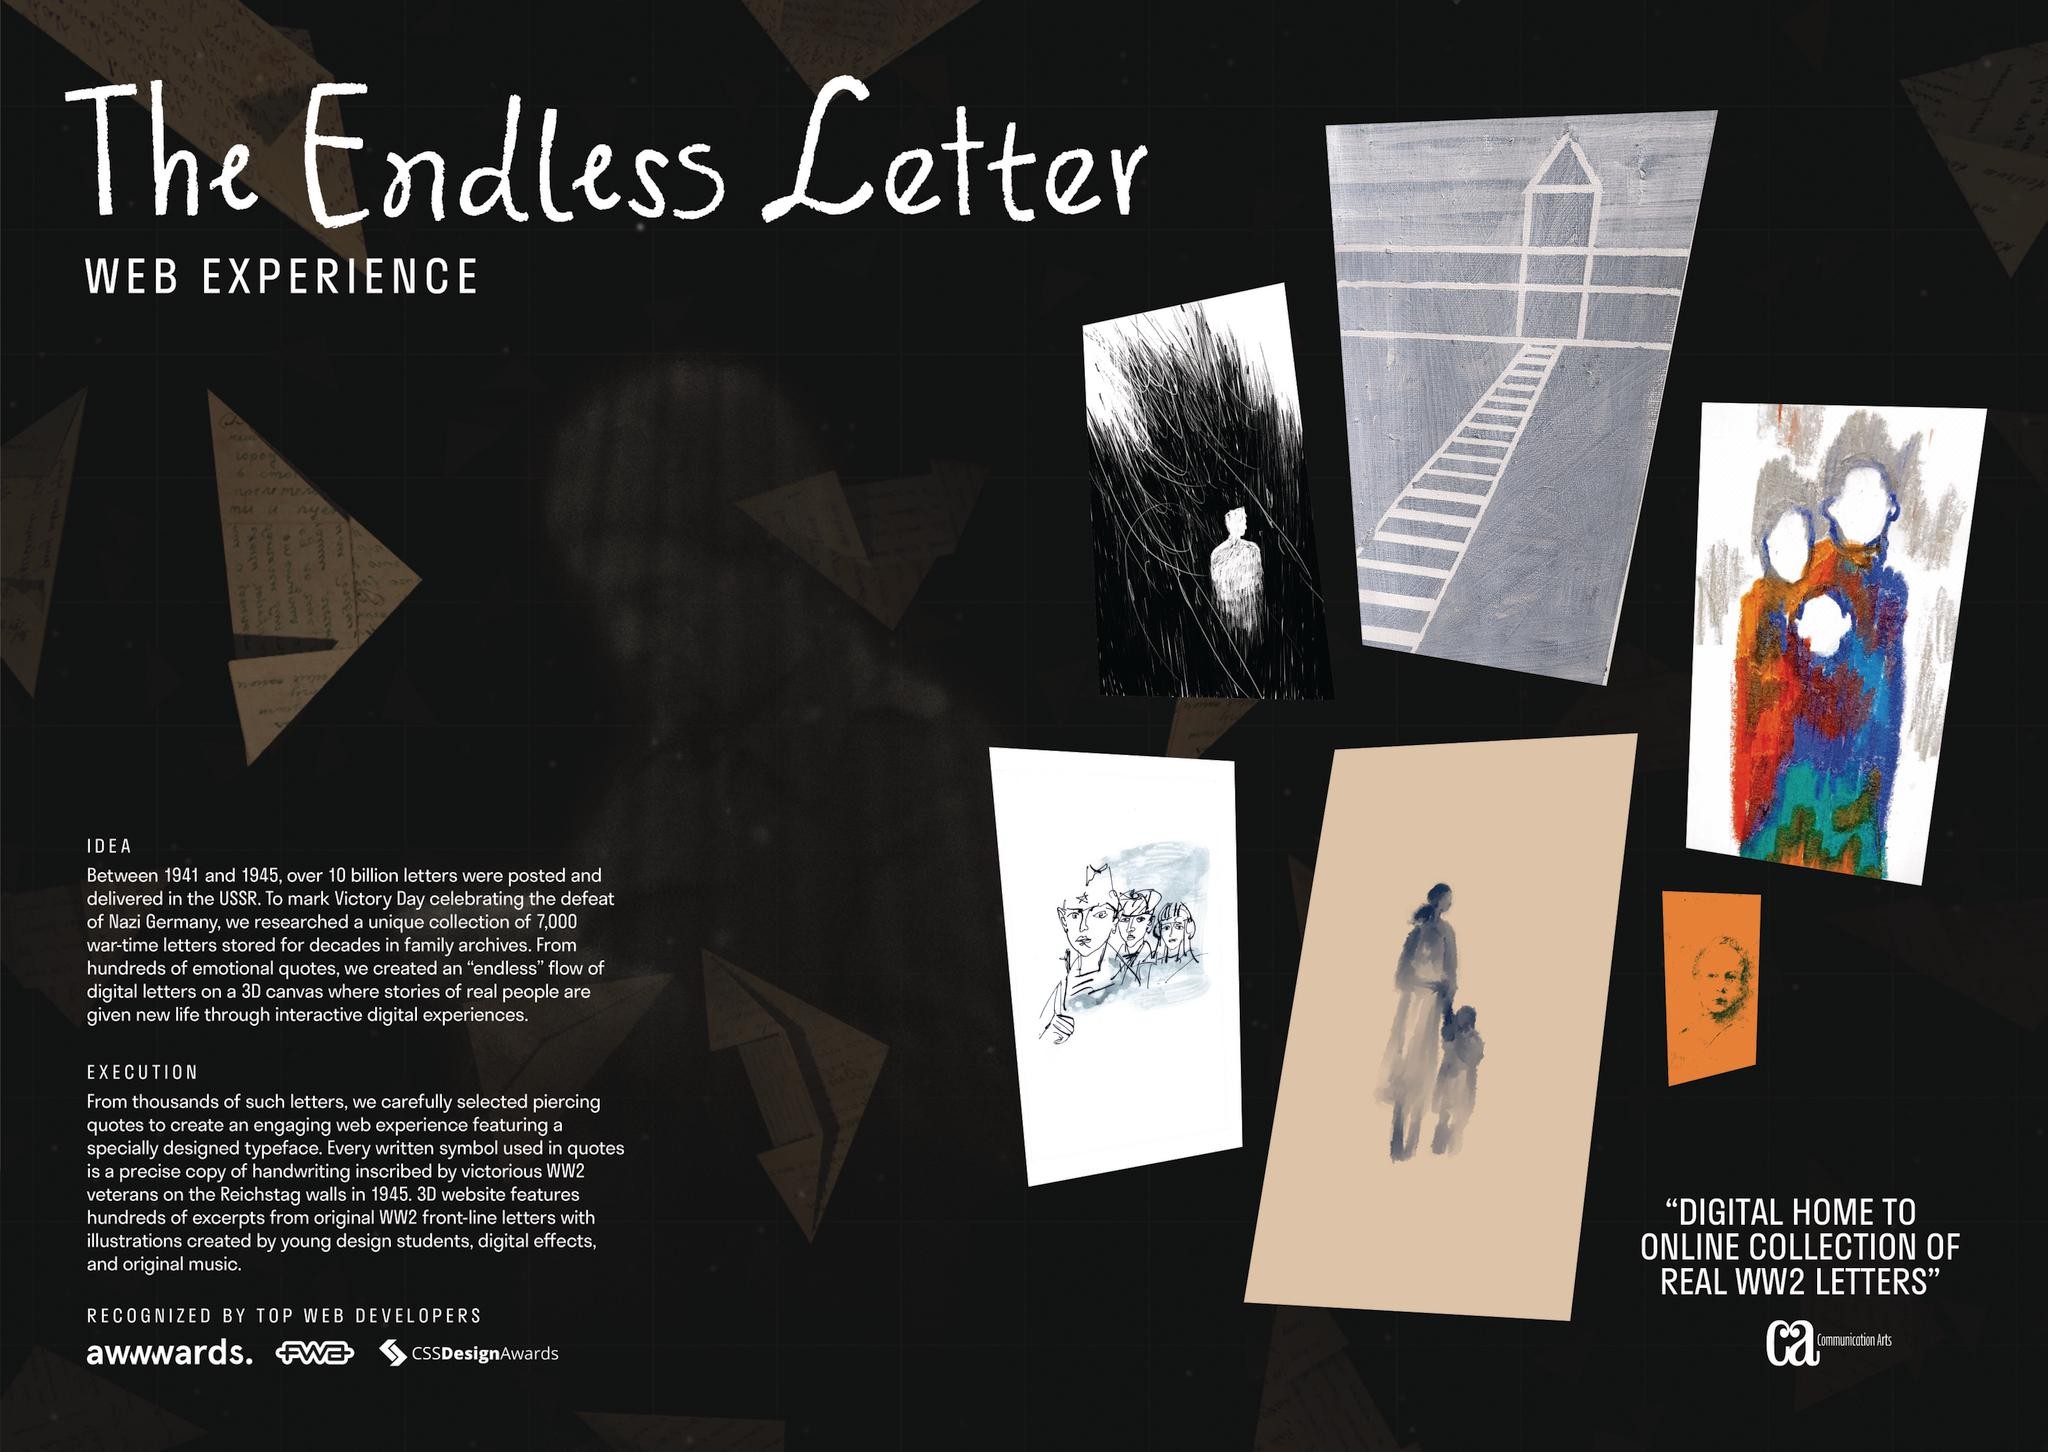 The Endless Letter: Web Experience